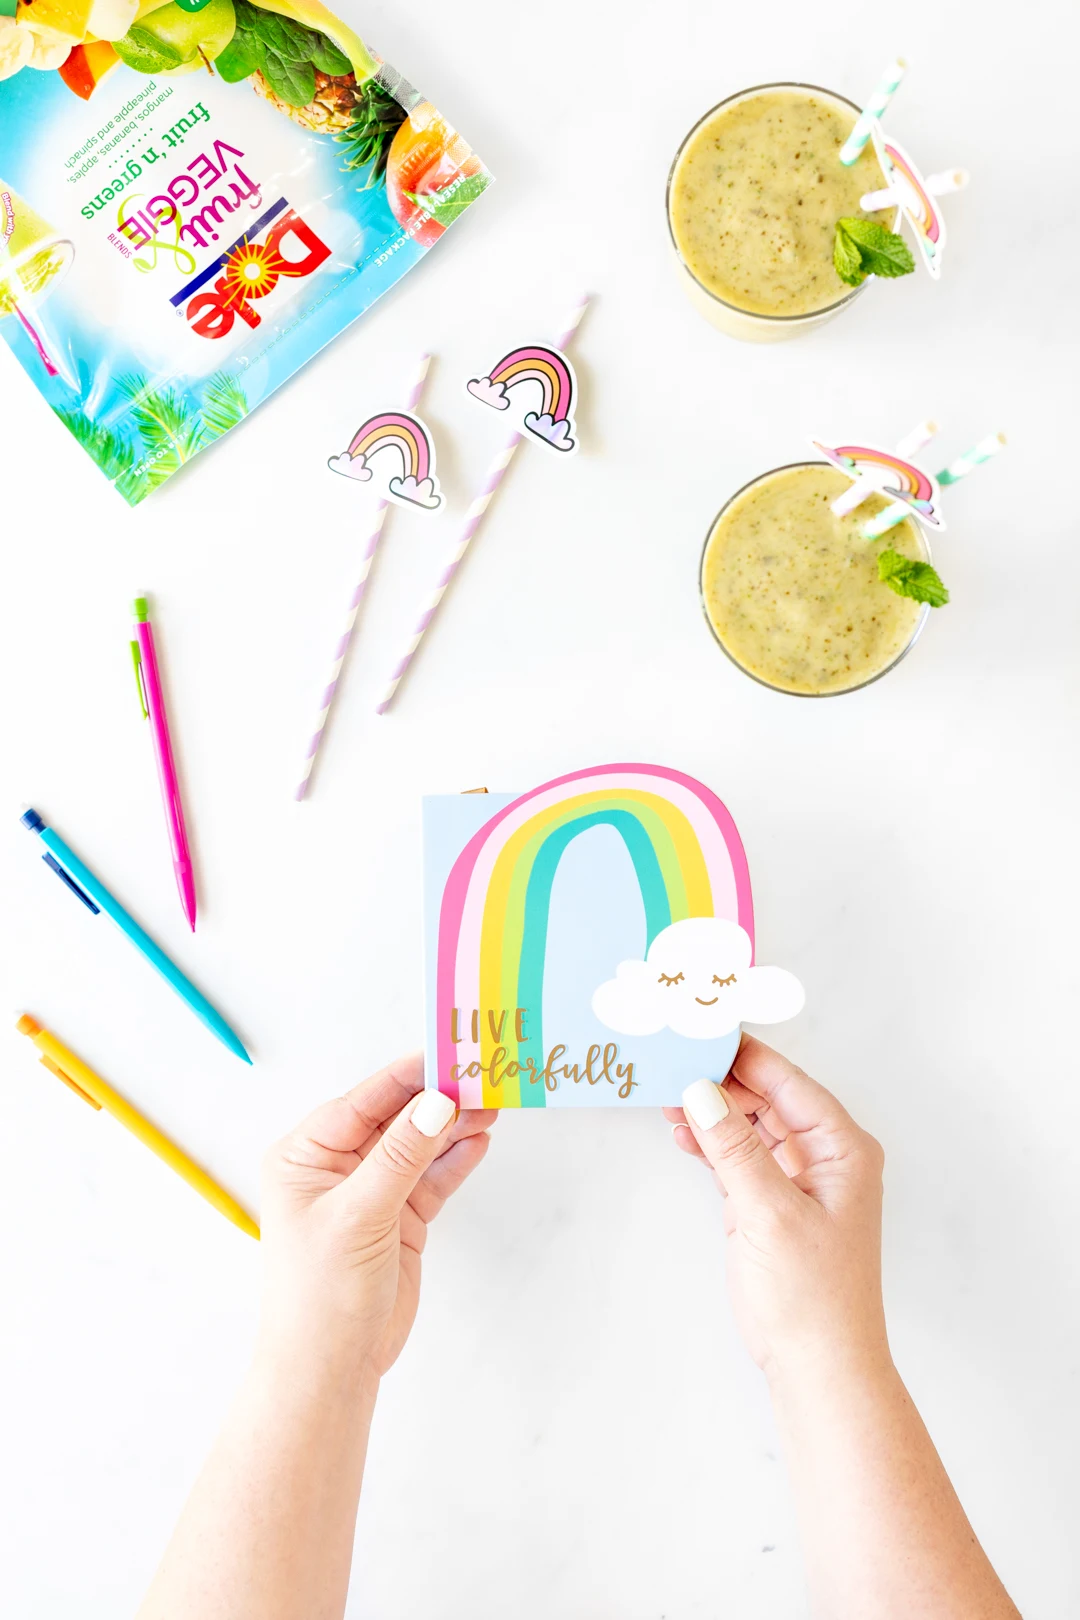 Live colorfully notepad with rainbow